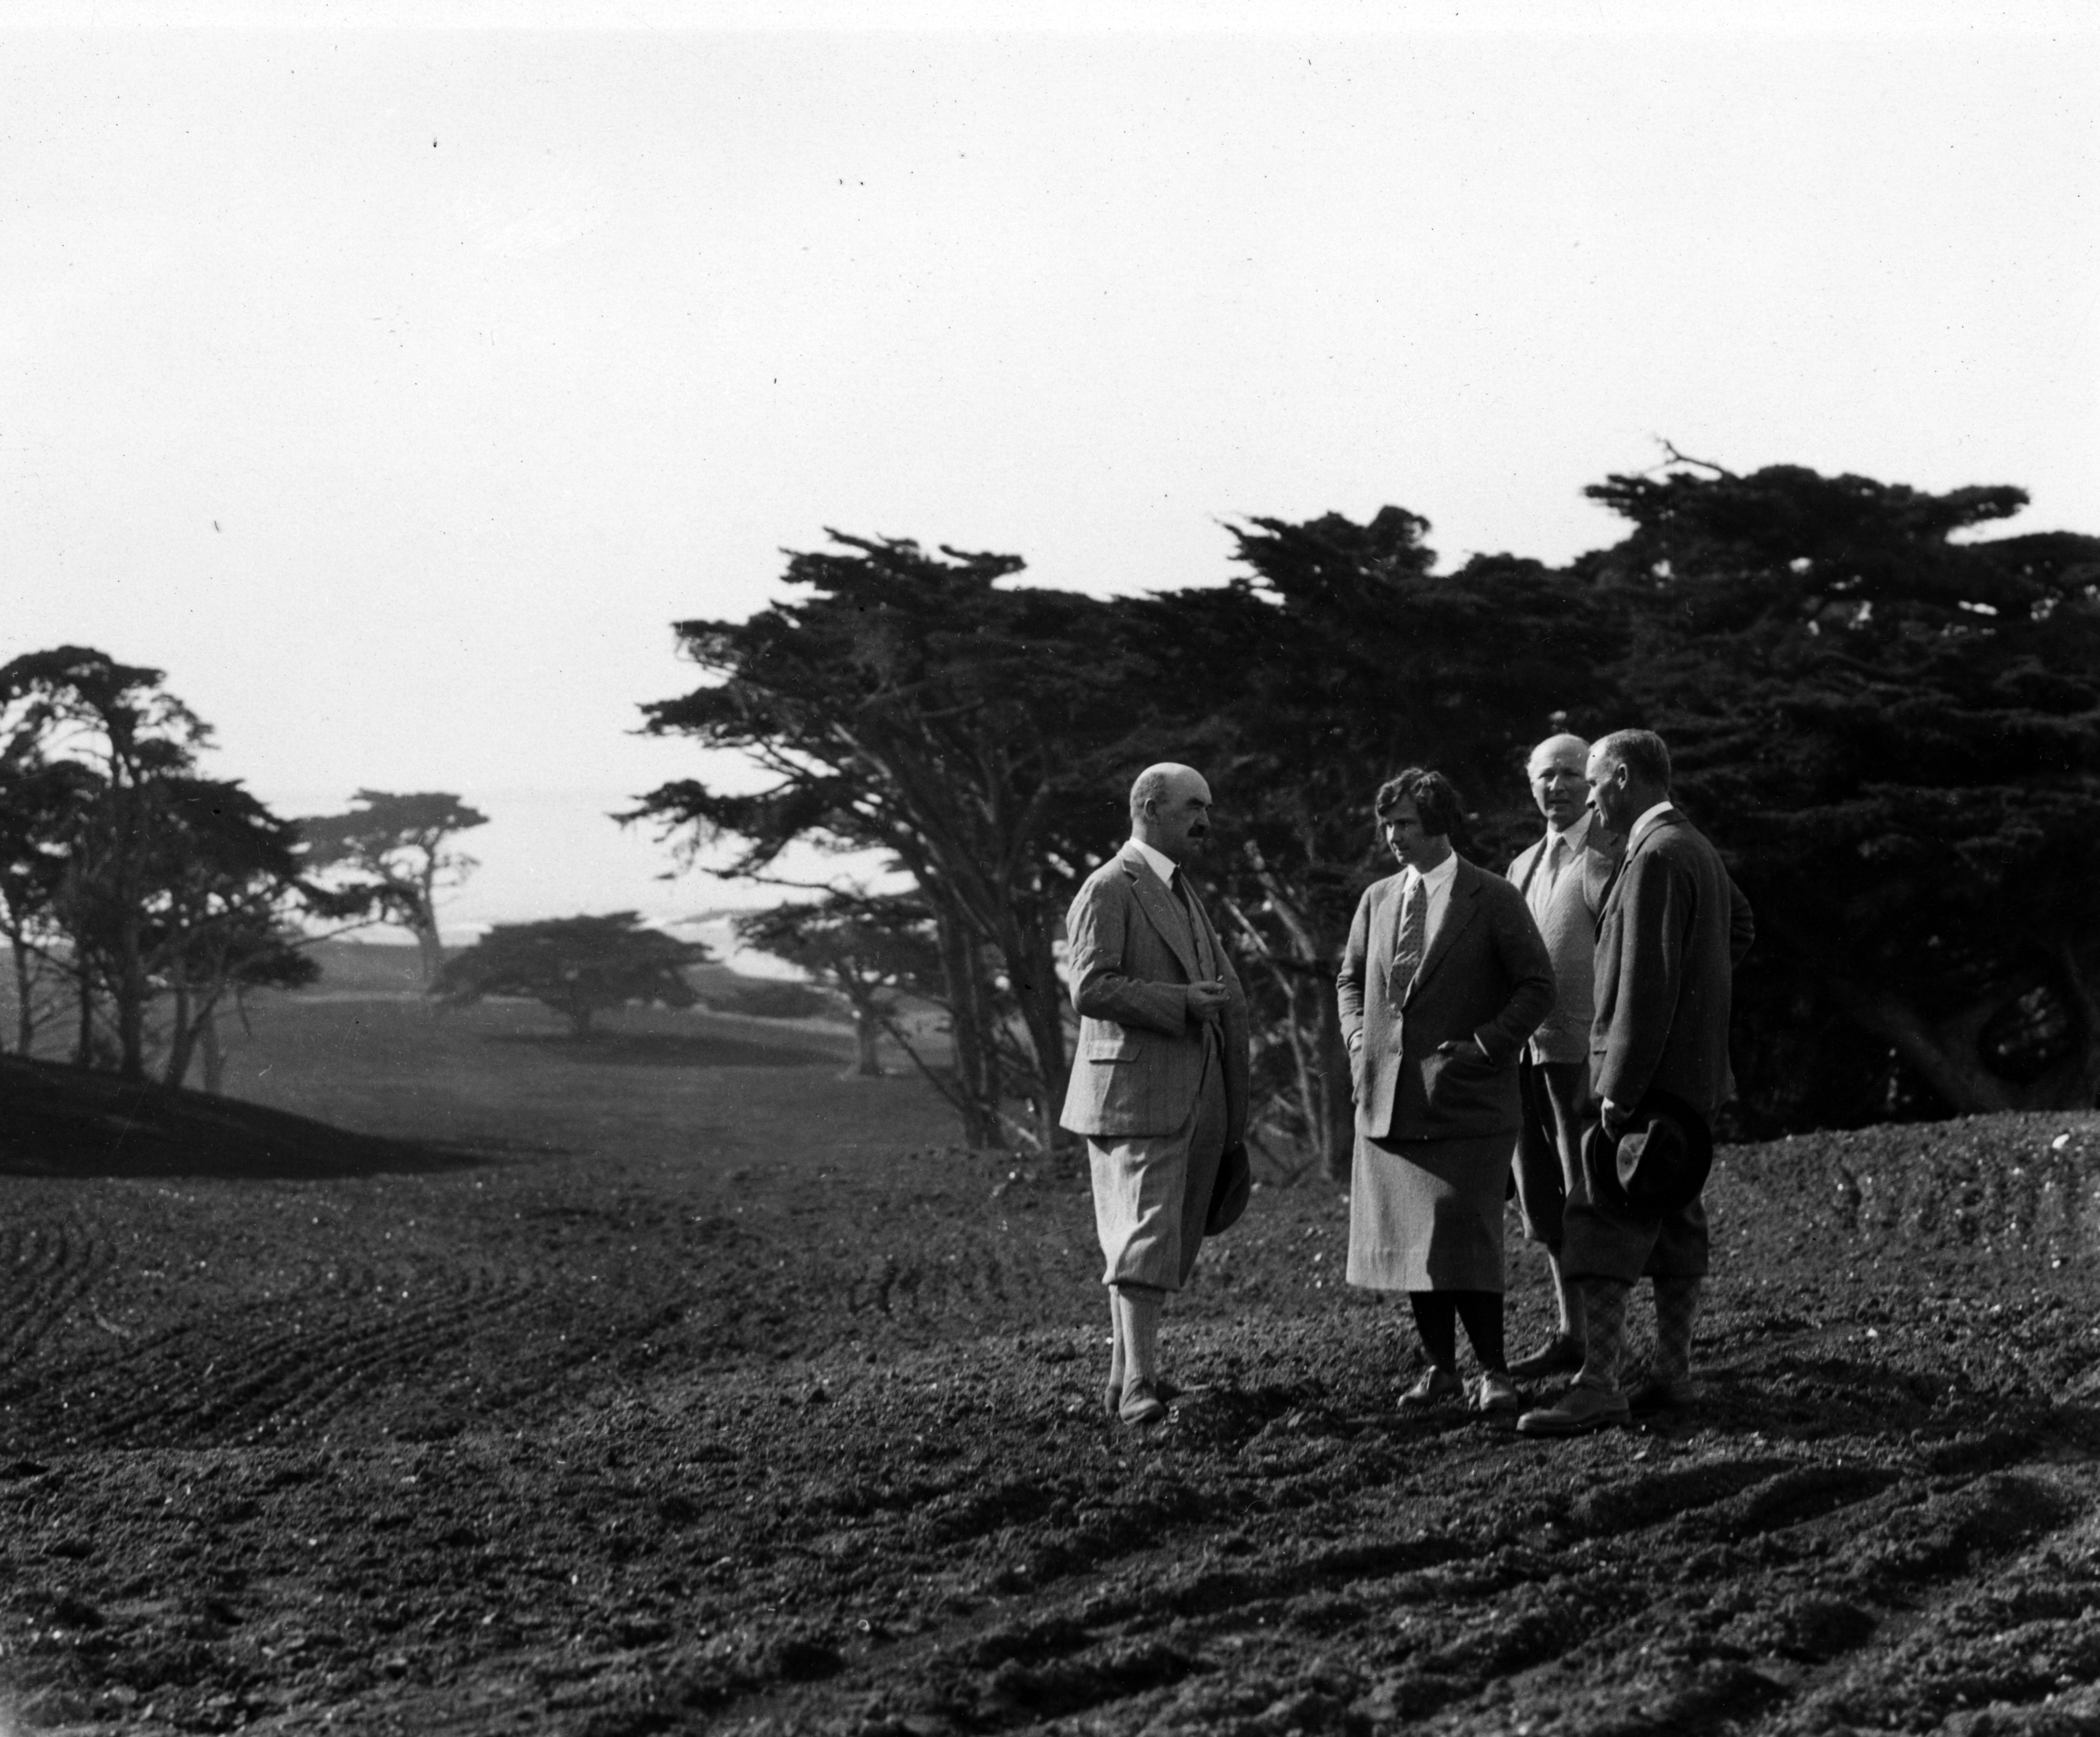 Alister MacKenzie (far left), Marion Hollins, HJ Whigham and Robert Hunter Sr. on the future 18th fairway at Cypress Point Club in 1928. (Julian P. Graham/Loon Hill)